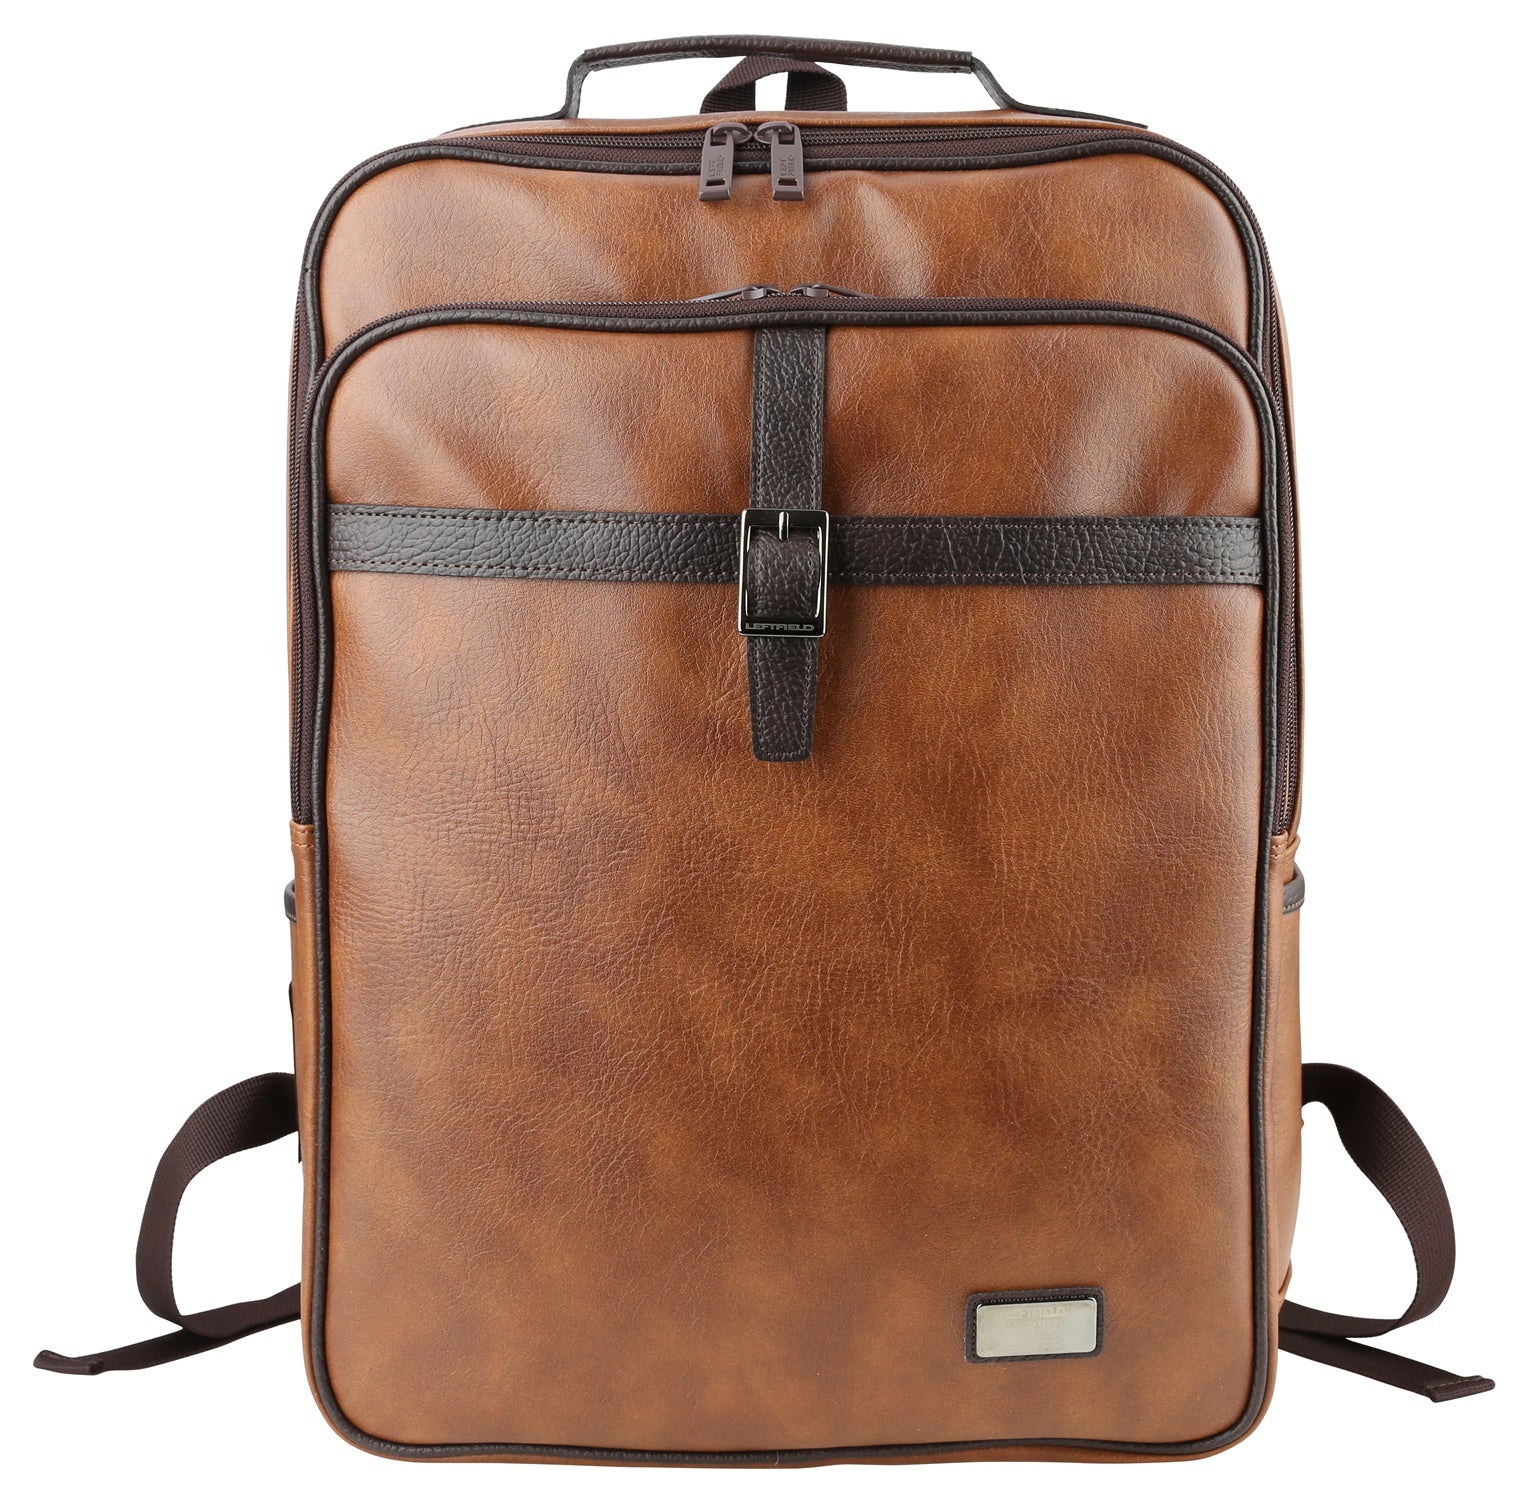 Tan Vintage Faux Leather Casual Daypacks Backpacks